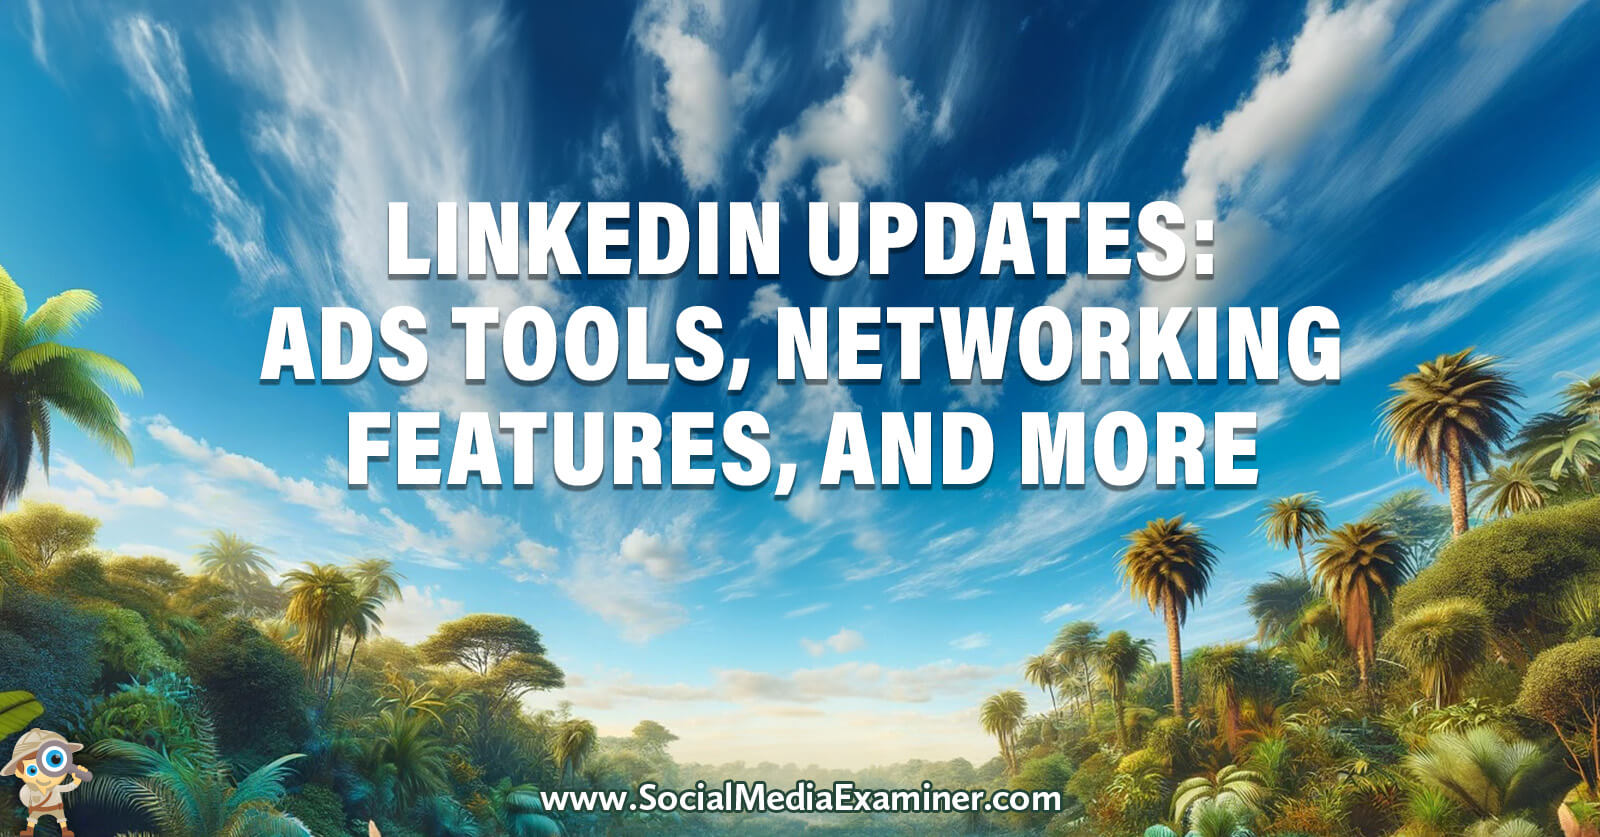 Linked Updates: Sponsored Articles, Ads Tools, Networking Features, and More by Social Media Examiner